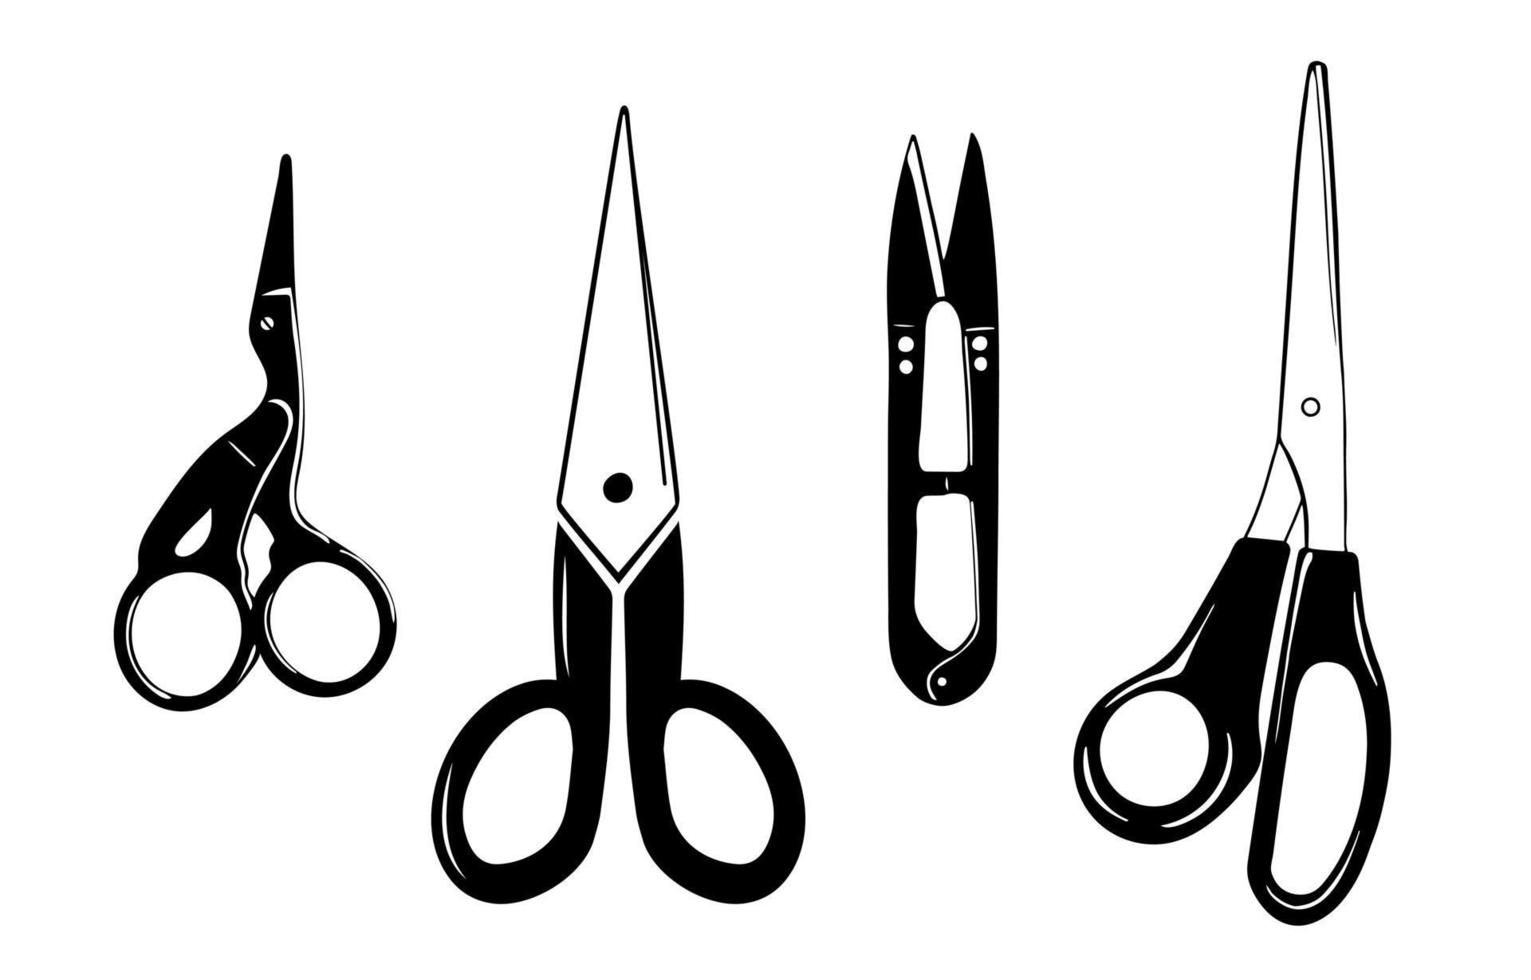 https://static.vecteezy.com/system/resources/previews/006/084/362/non_2x/set-of-tailor-and-embroidery-scissors-crane-small-scissors-snipper-fabric-scissors-isolated-on-white-background-silhouette-vector.jpg